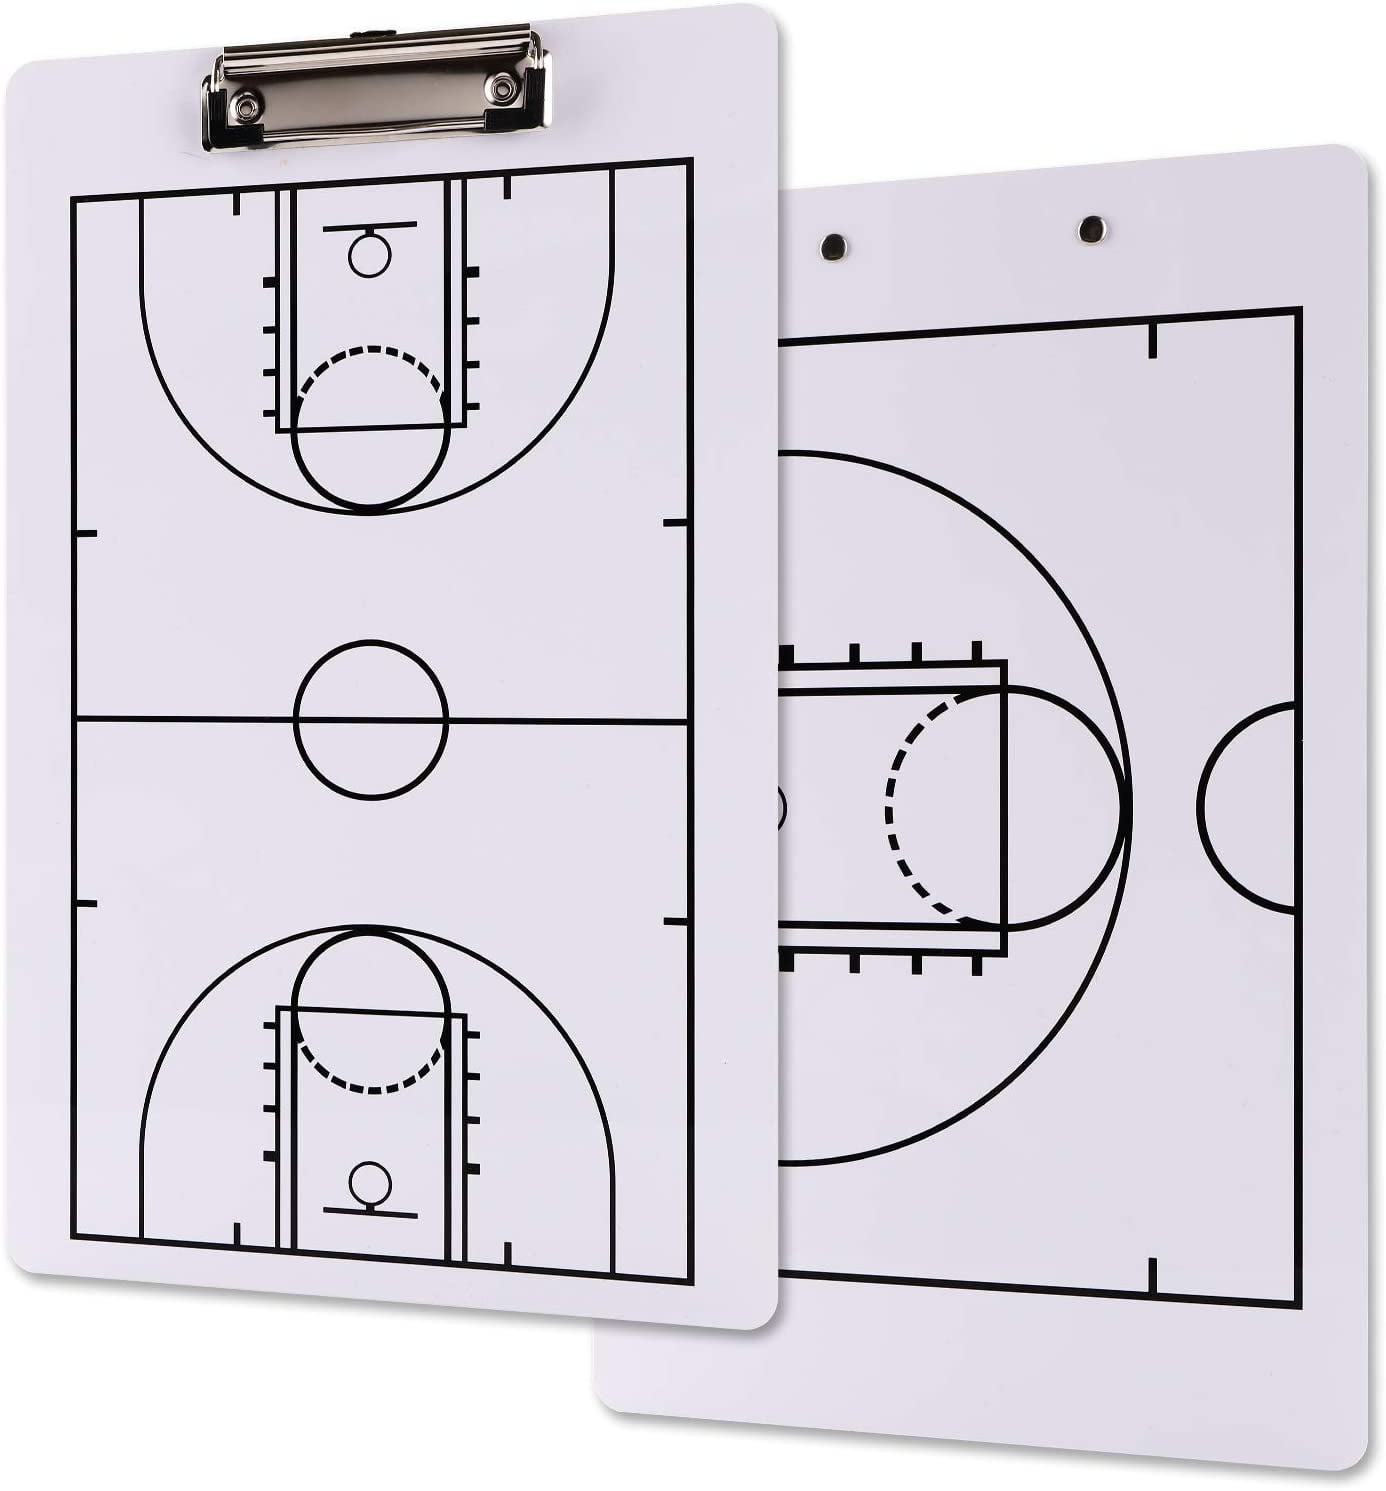 Coaches Dry Erase Clipboard Basketball Game and Basketball Training Tactical Command lyfLux Two Sides with Full & Half Court Dry Erase Marker Board for Basketball and 2 pcs Coach's Whistle 